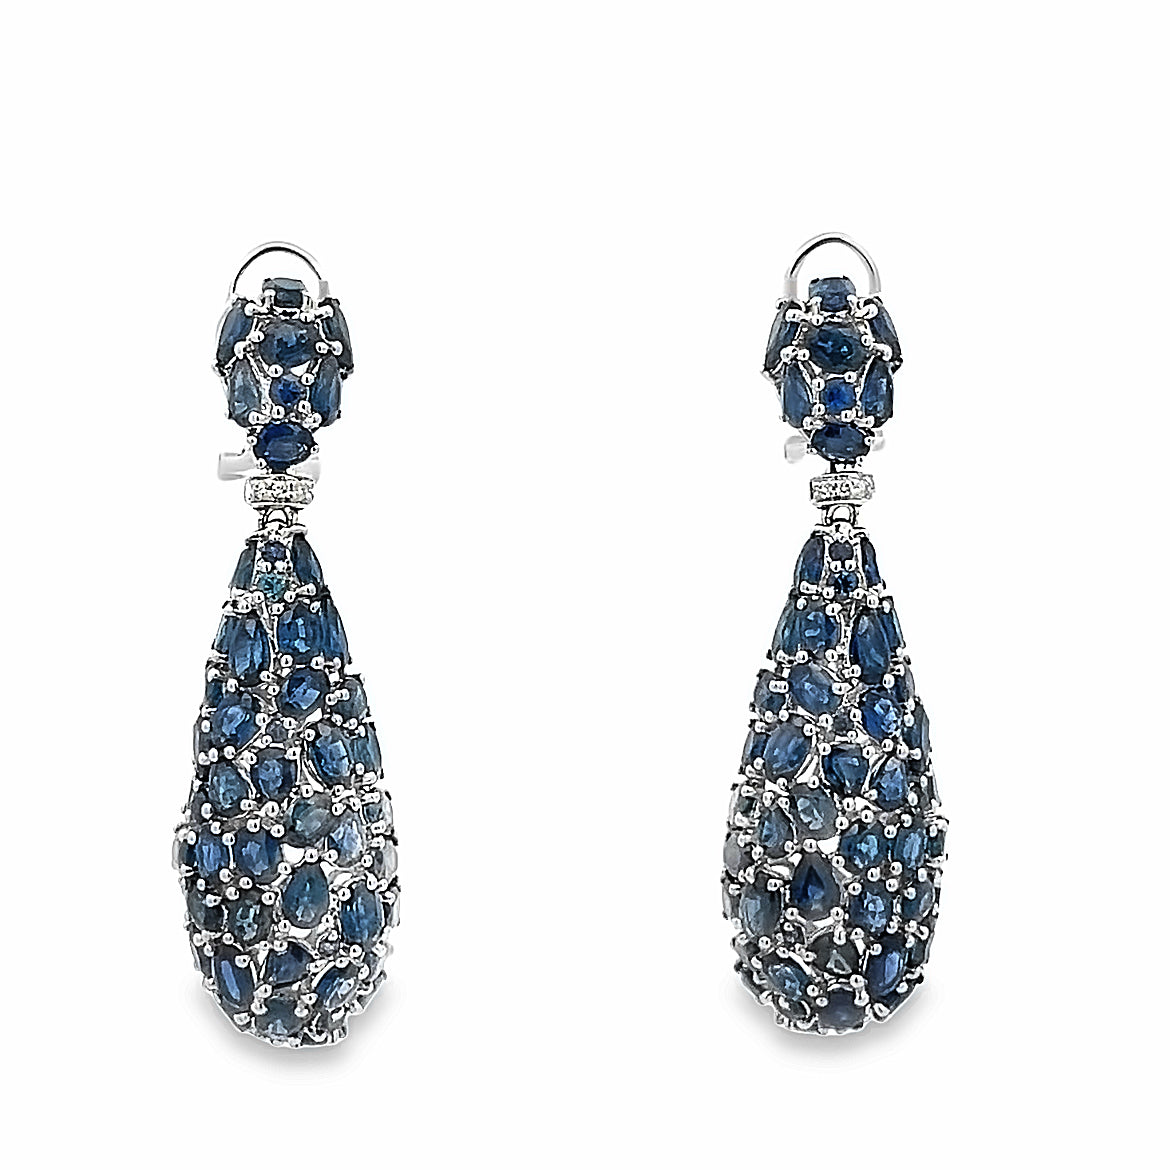 18K WHITE GOLD DROP EARRINGS WITH BLUE SAPPHIRE